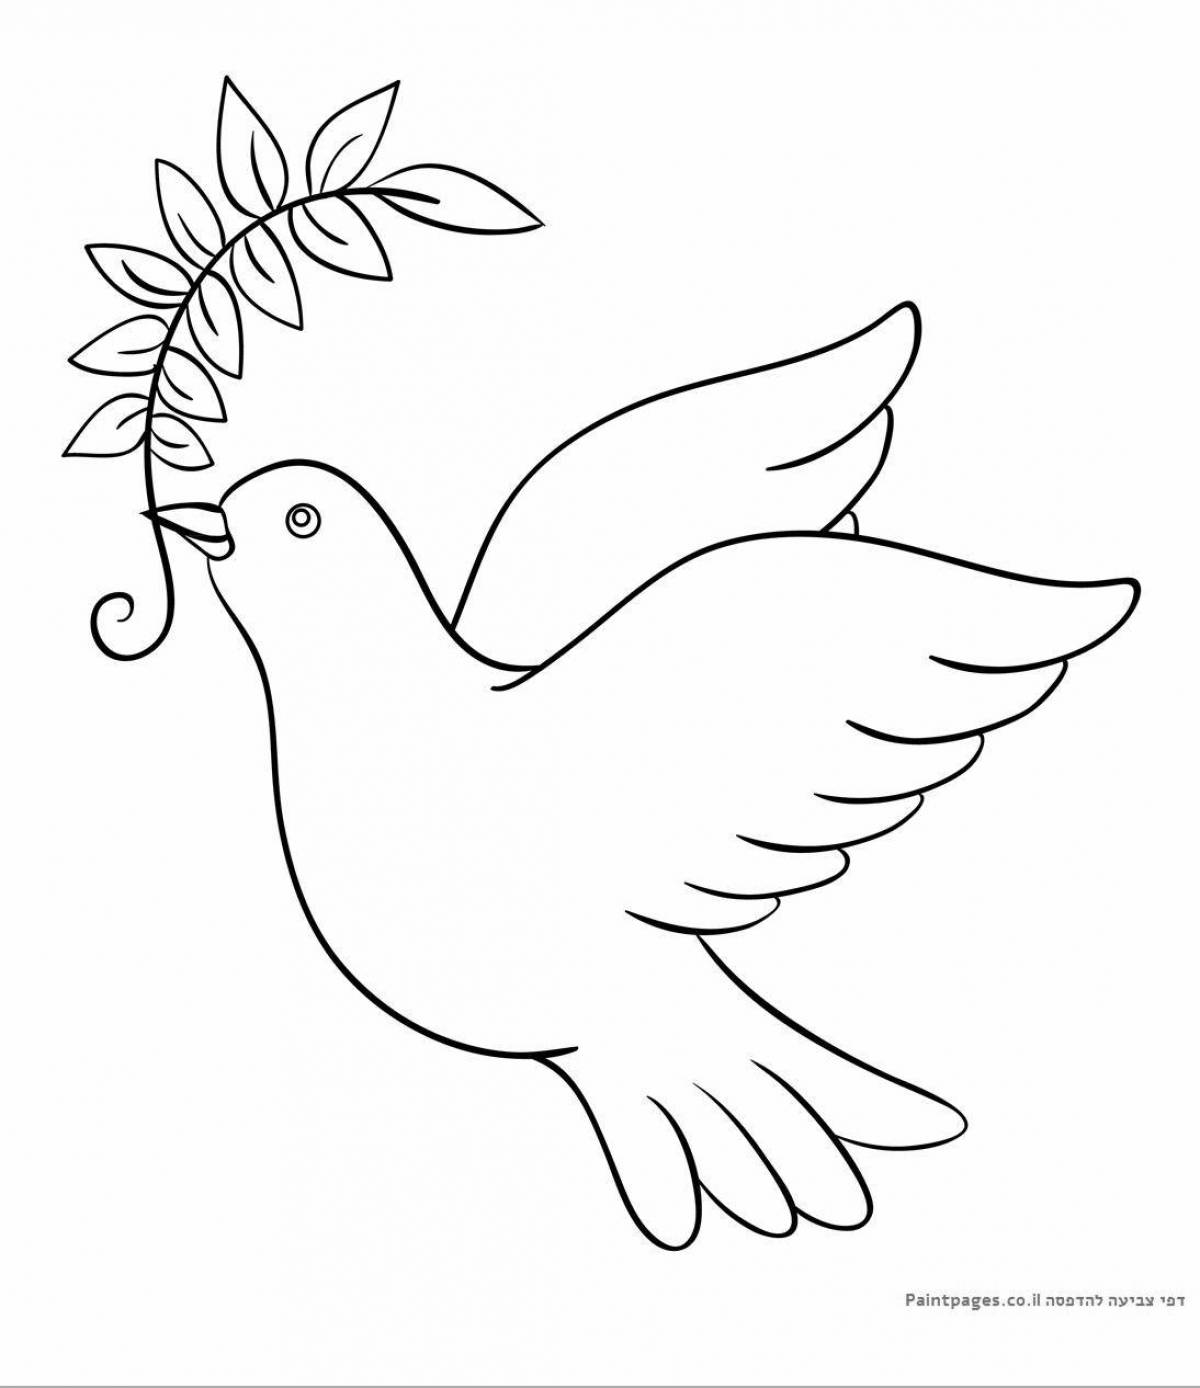 Charismatic white dove coloring page